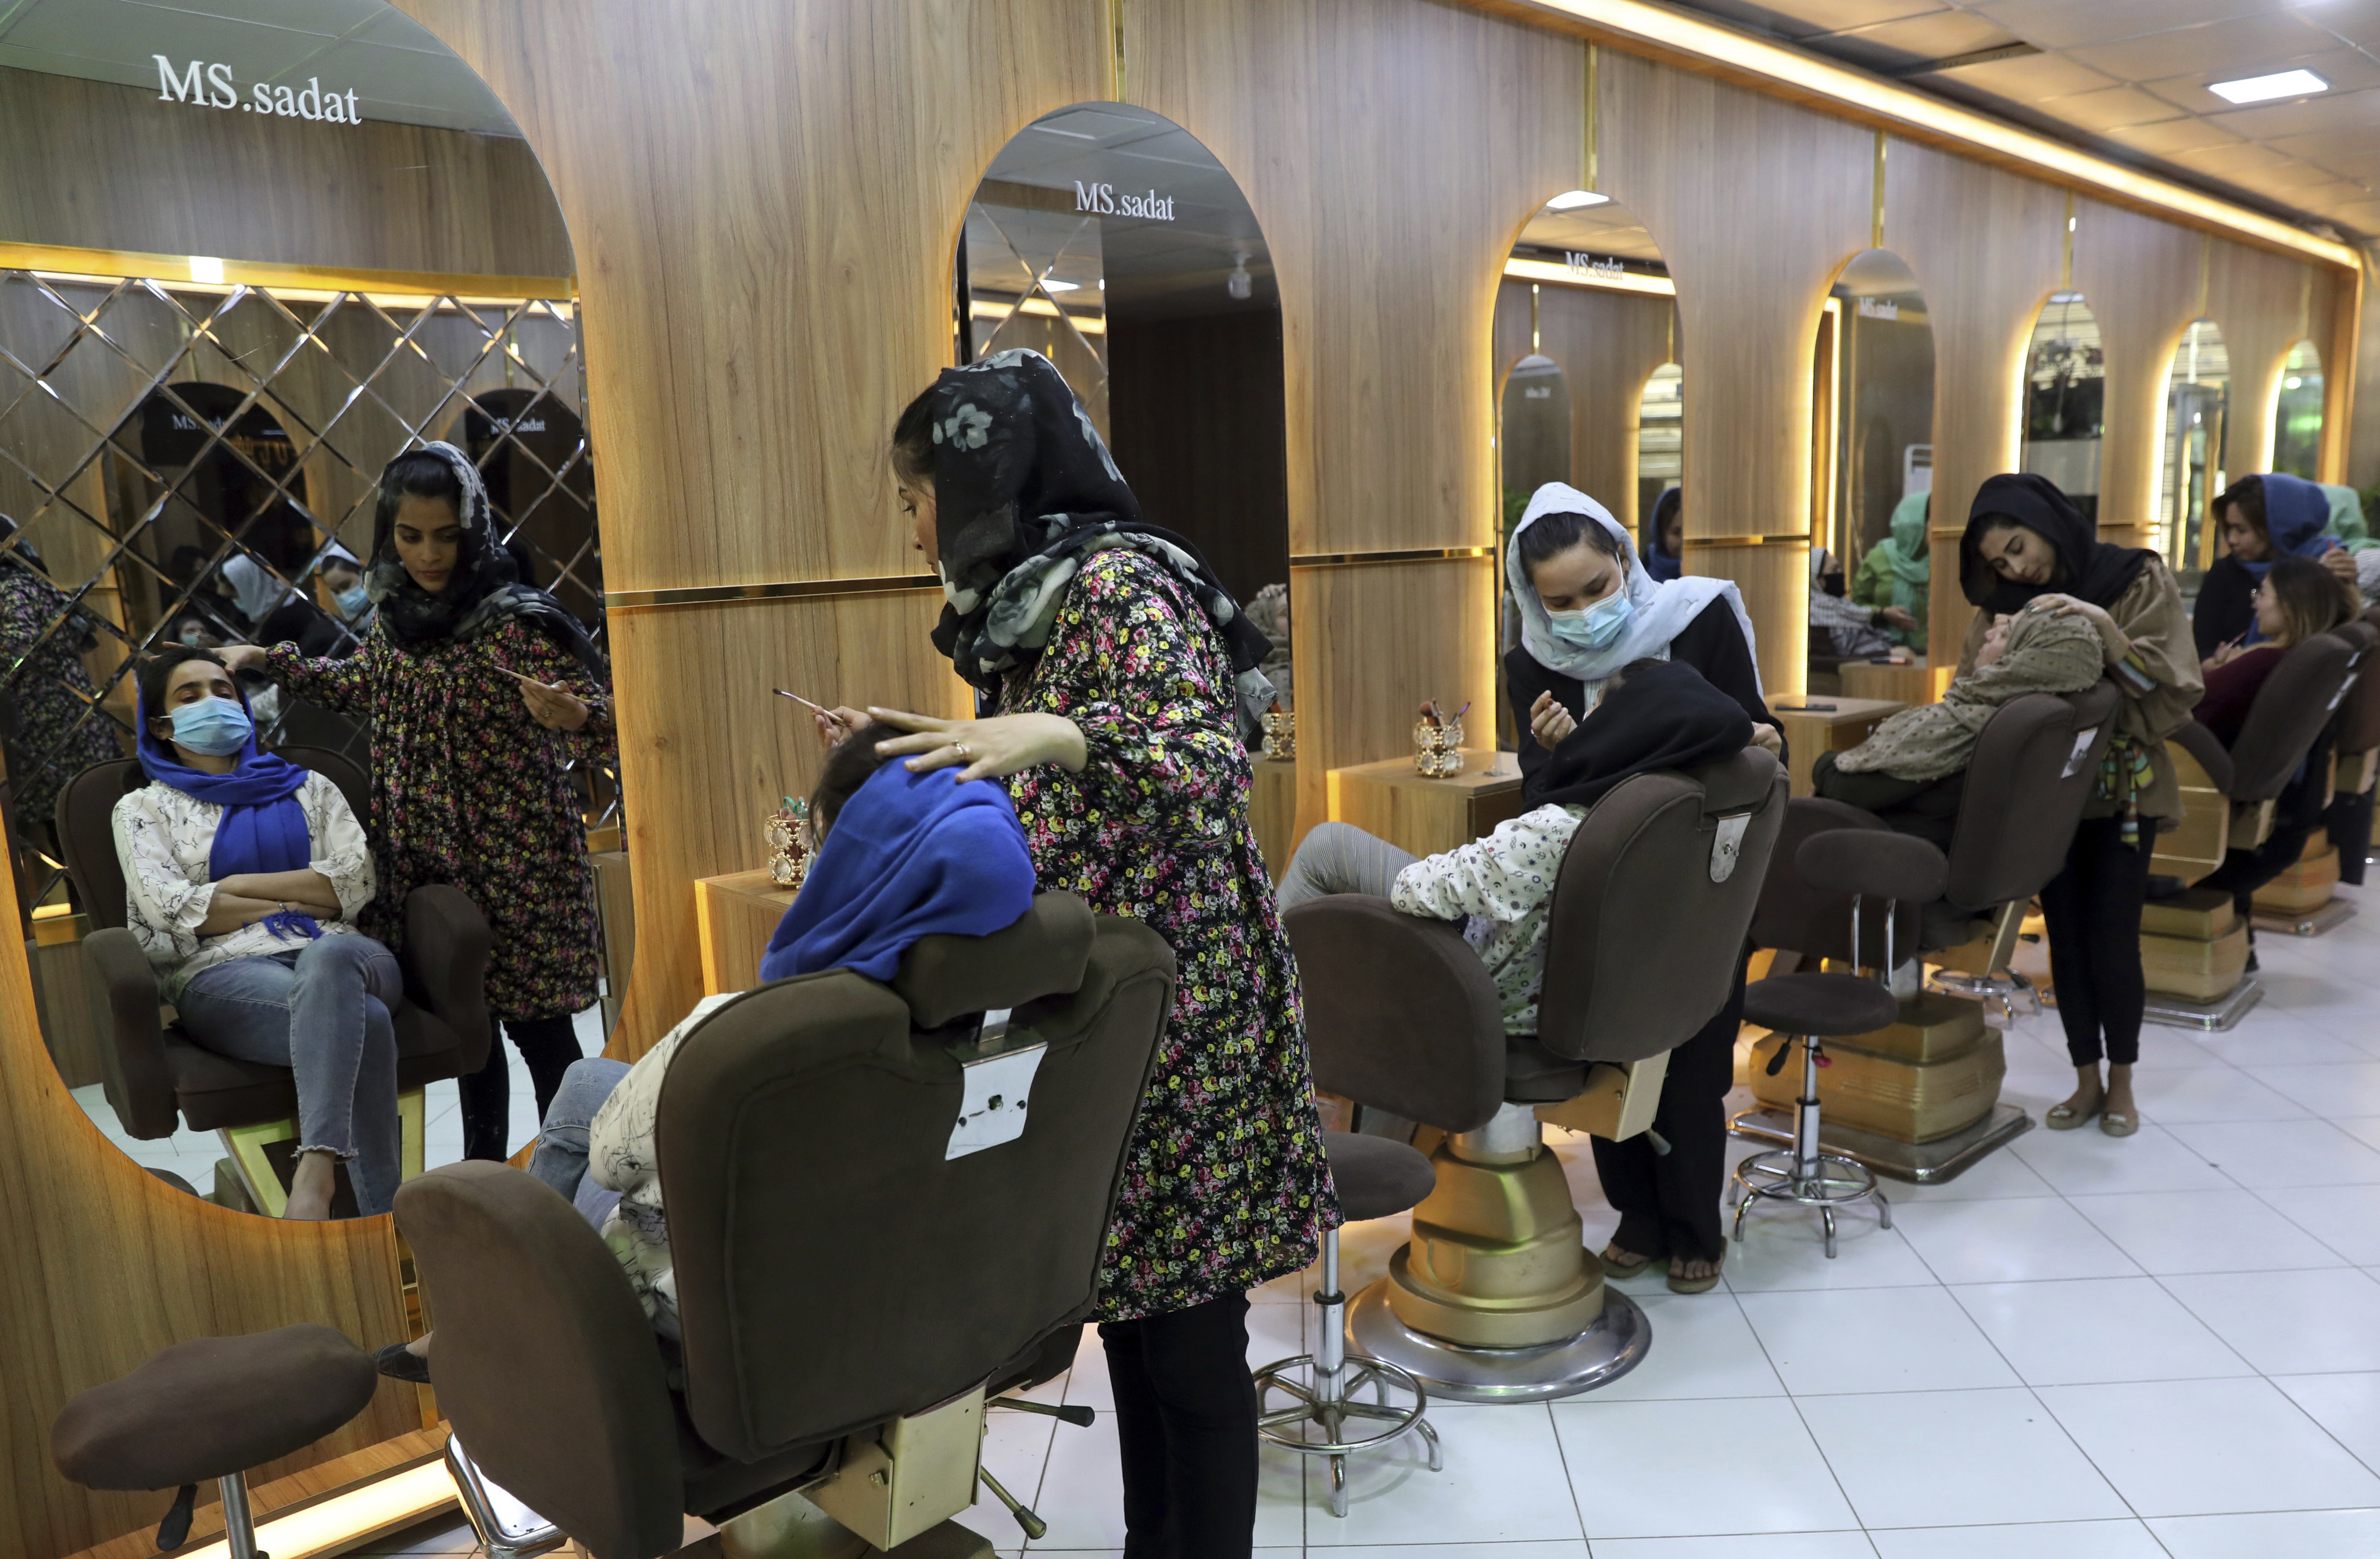 Beauticians put make-up on customers at a salon in Kabul on April 25, 2021. Photo: AP